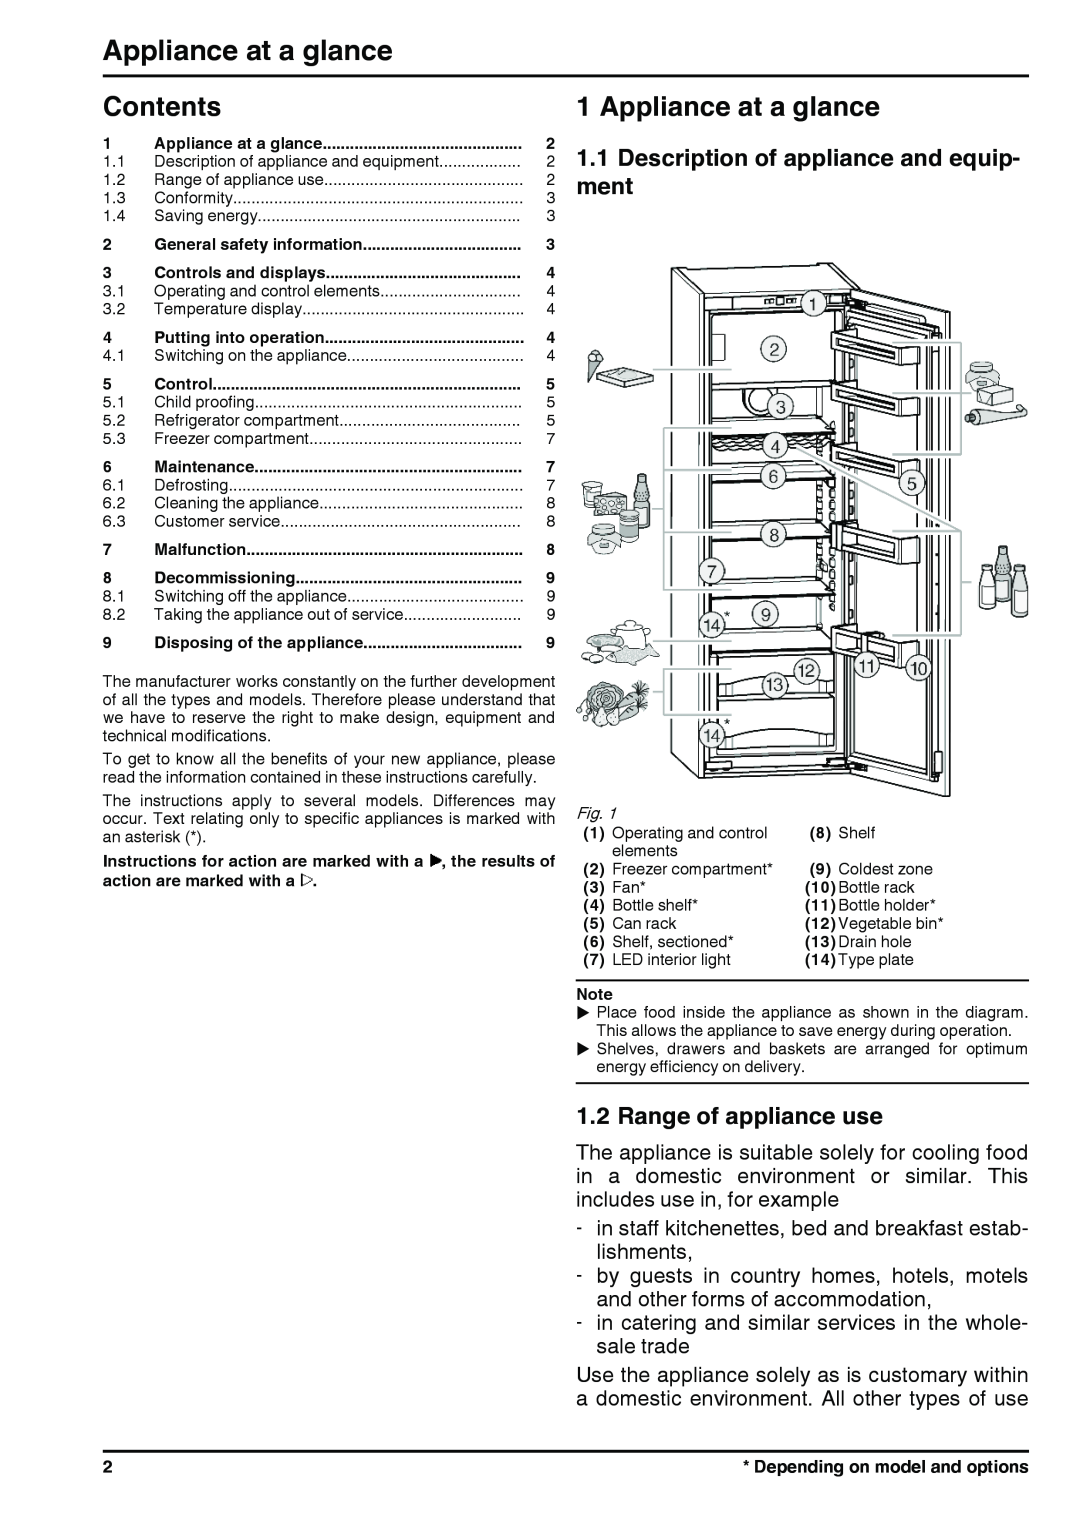 Liebherr 7085400-01 Appliance at a glance, Contents, Description of appliance and equip- ment, Range of appliance use 